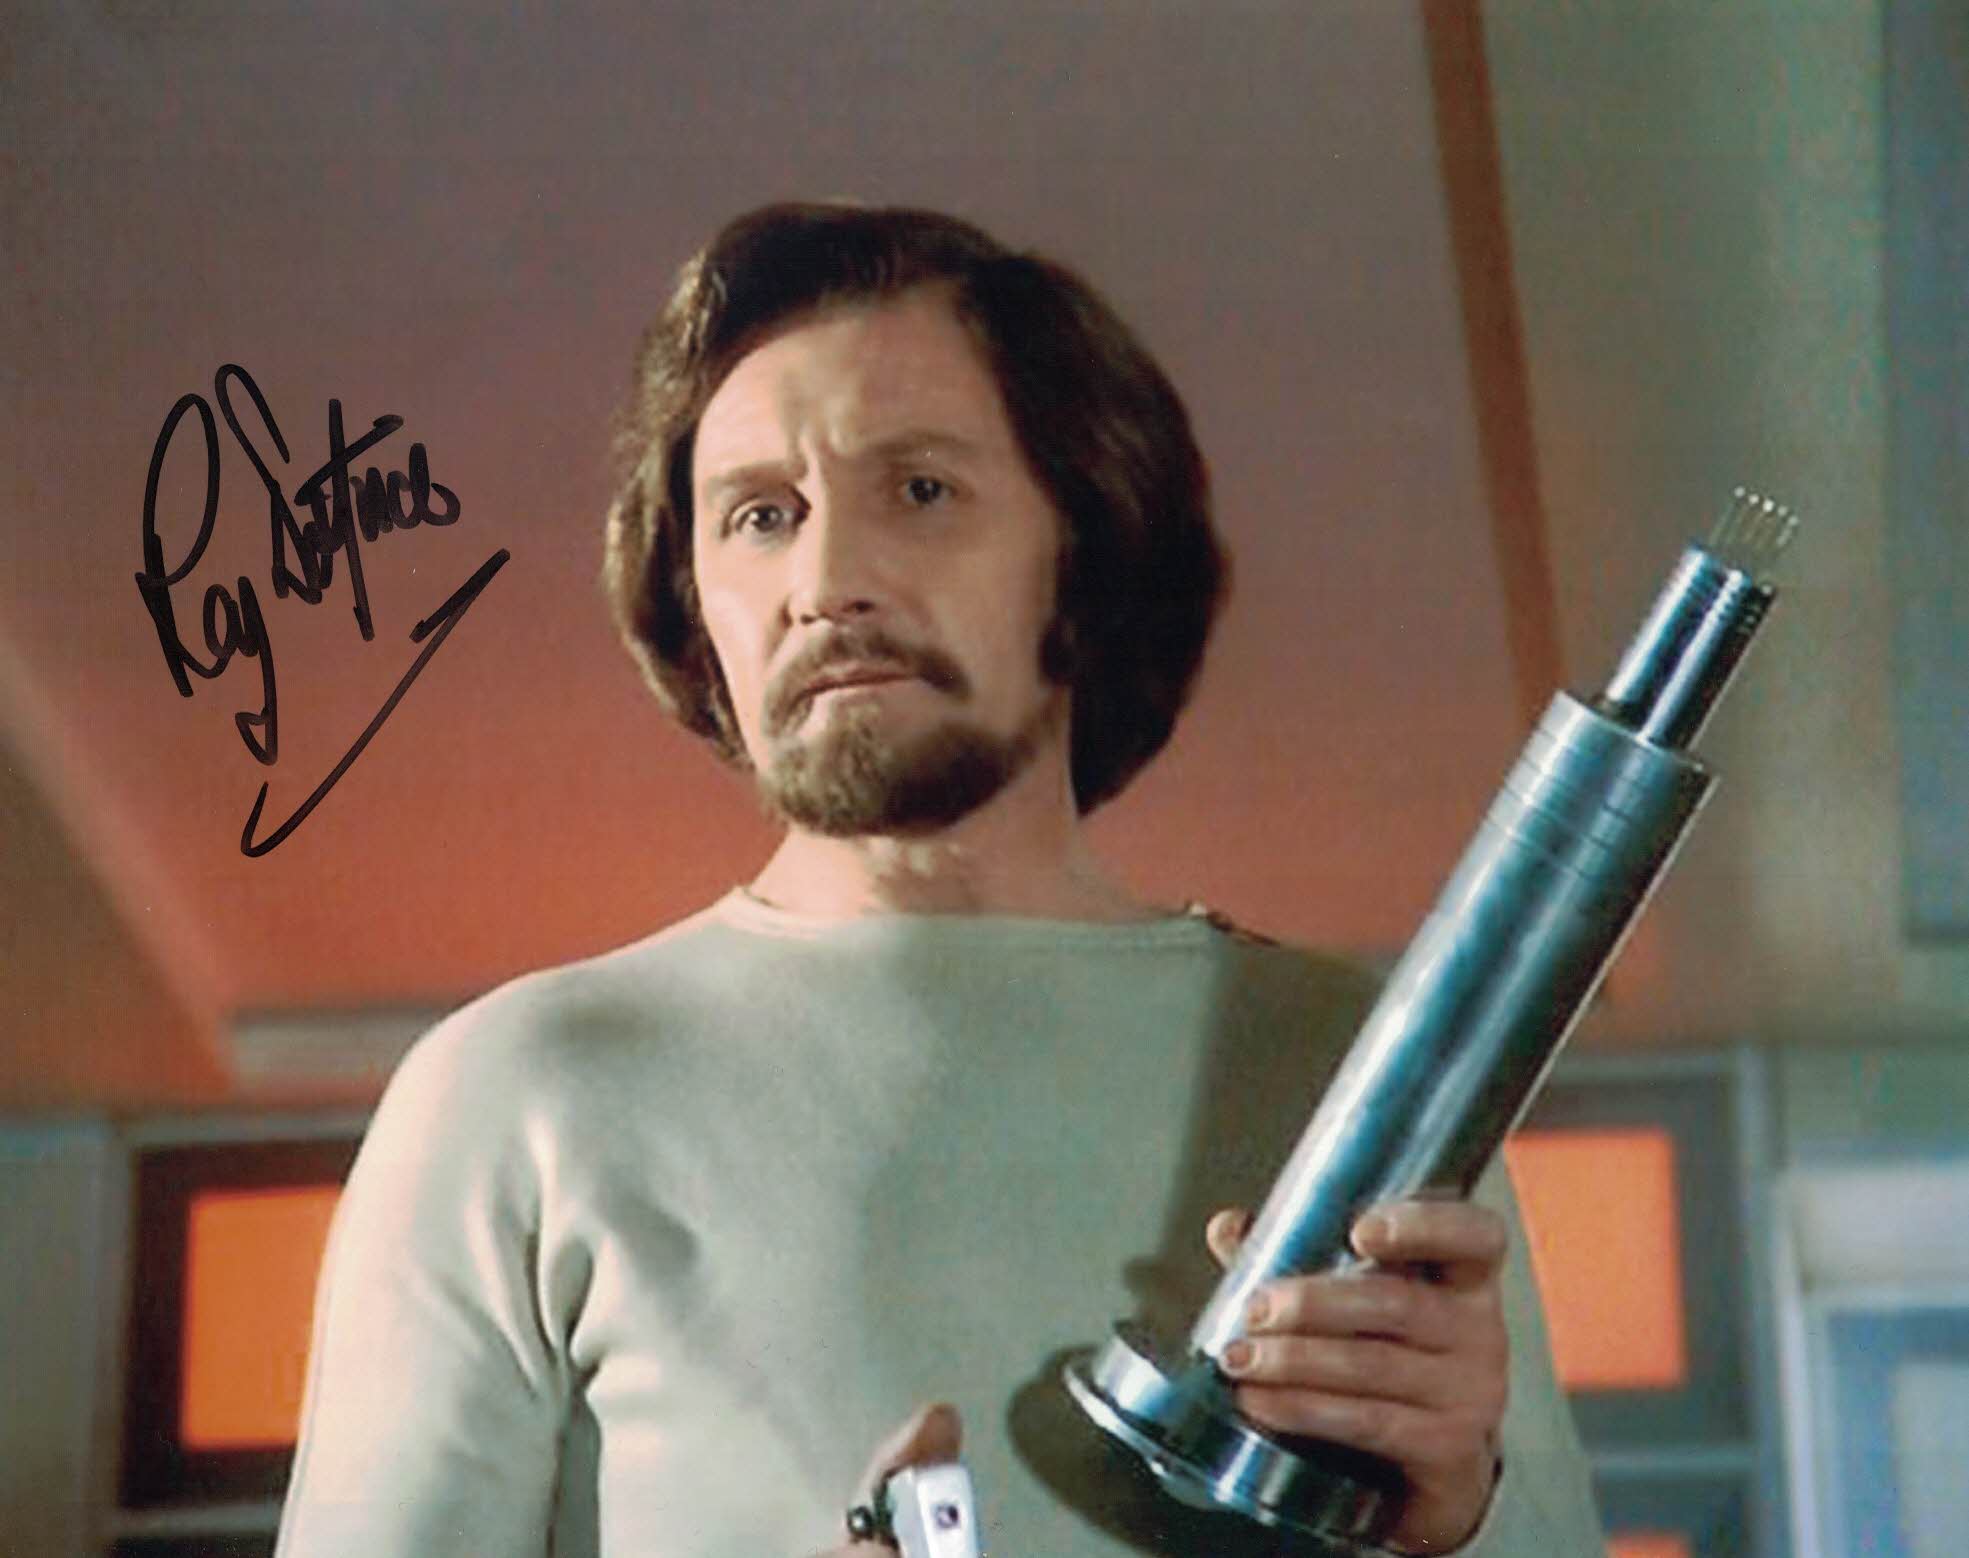 ROY DOTRICE - Simmonds in Space 1999 - hand signed 10 x 8 photo